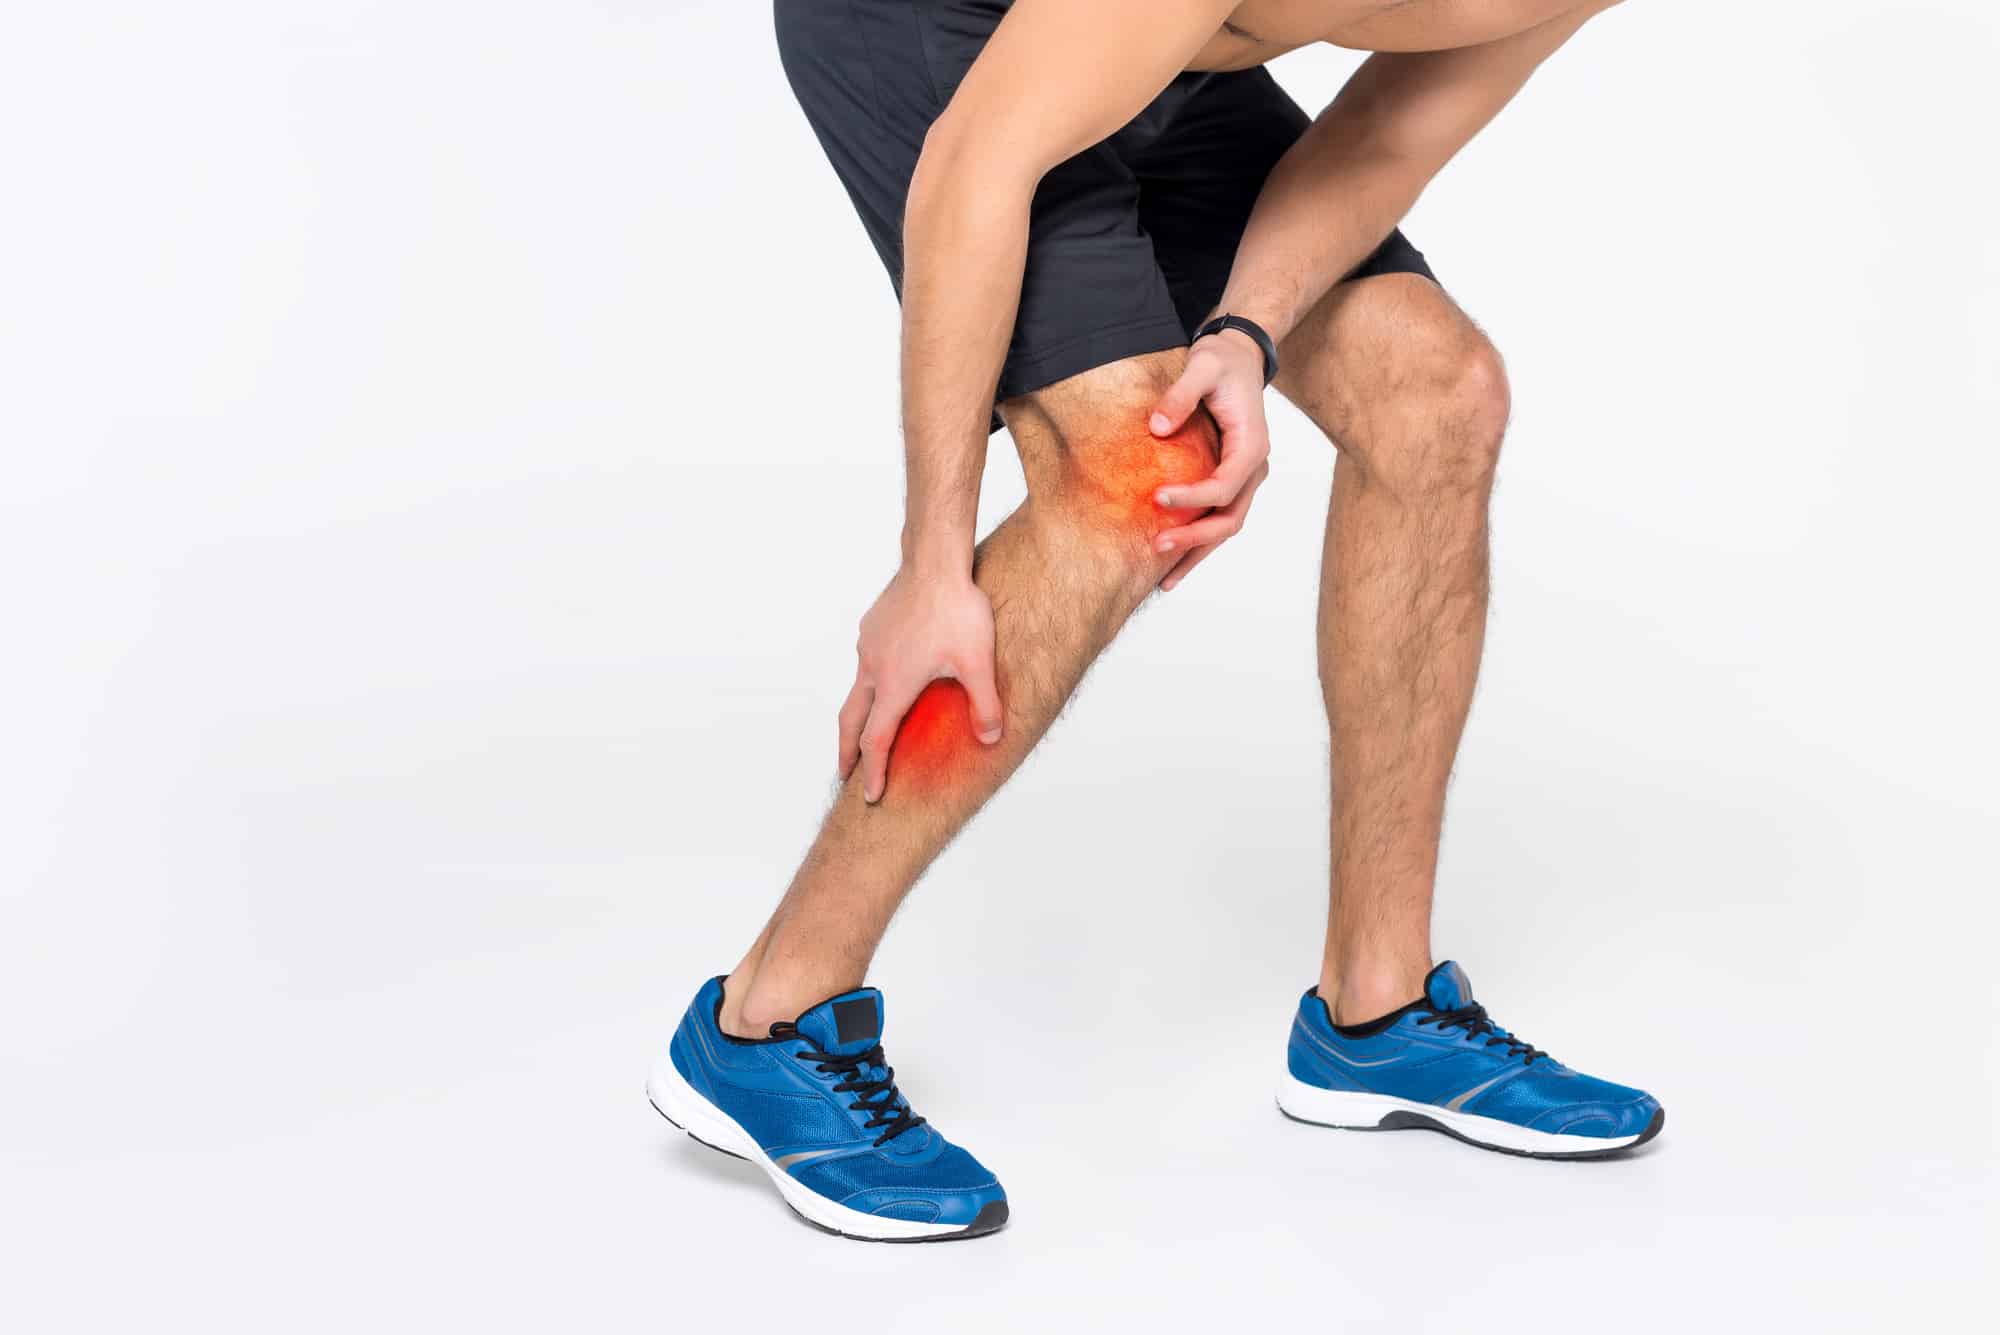 I Have Ongoing Pain In My Leg Muscles; What Can I Do?